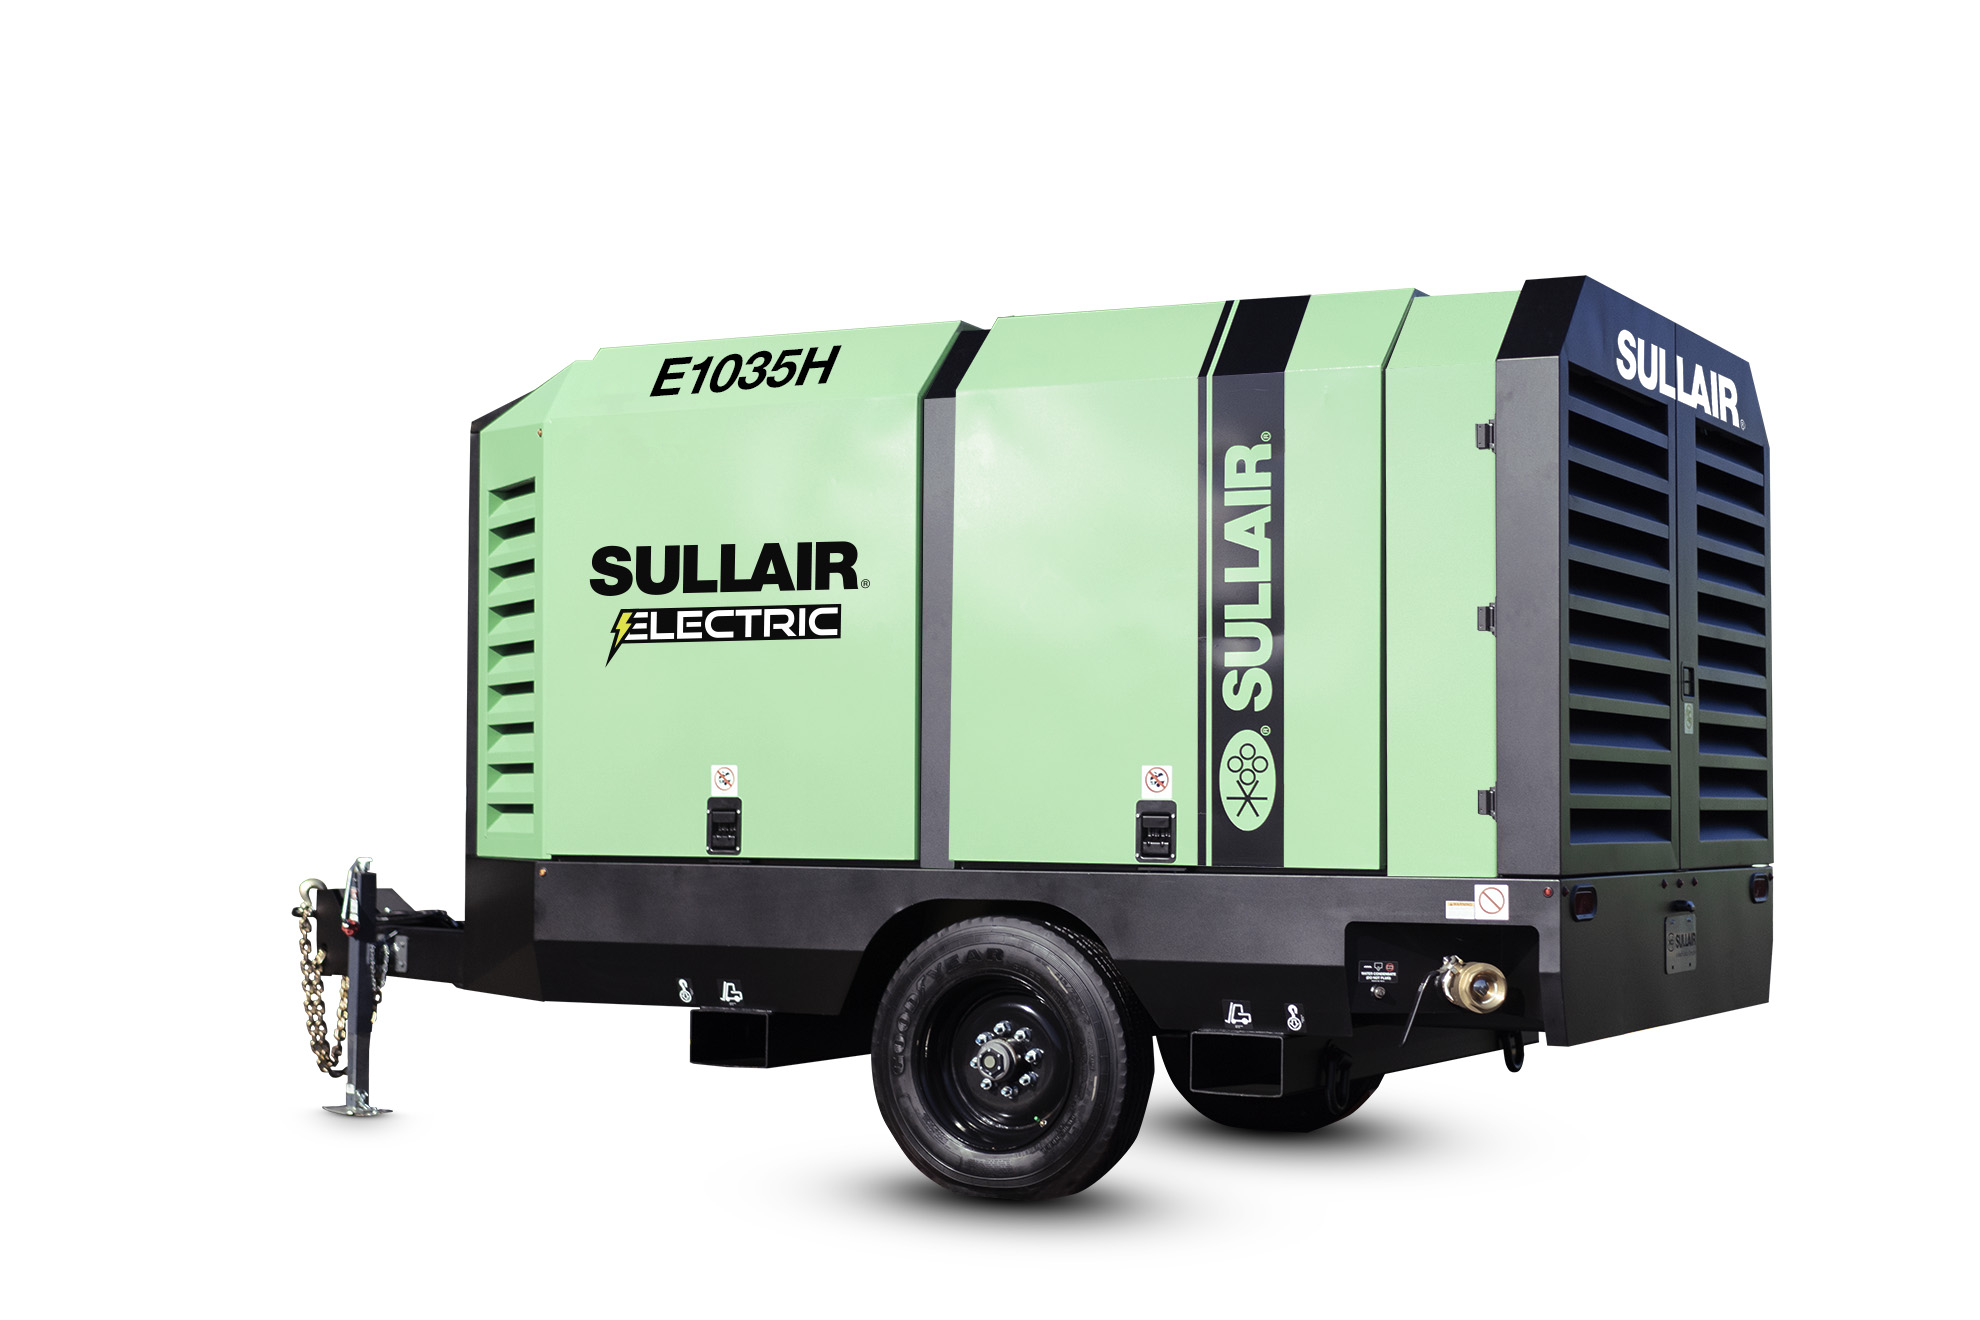 Sullair launches environment-forward electric portable compressor for the construction and rental markets.